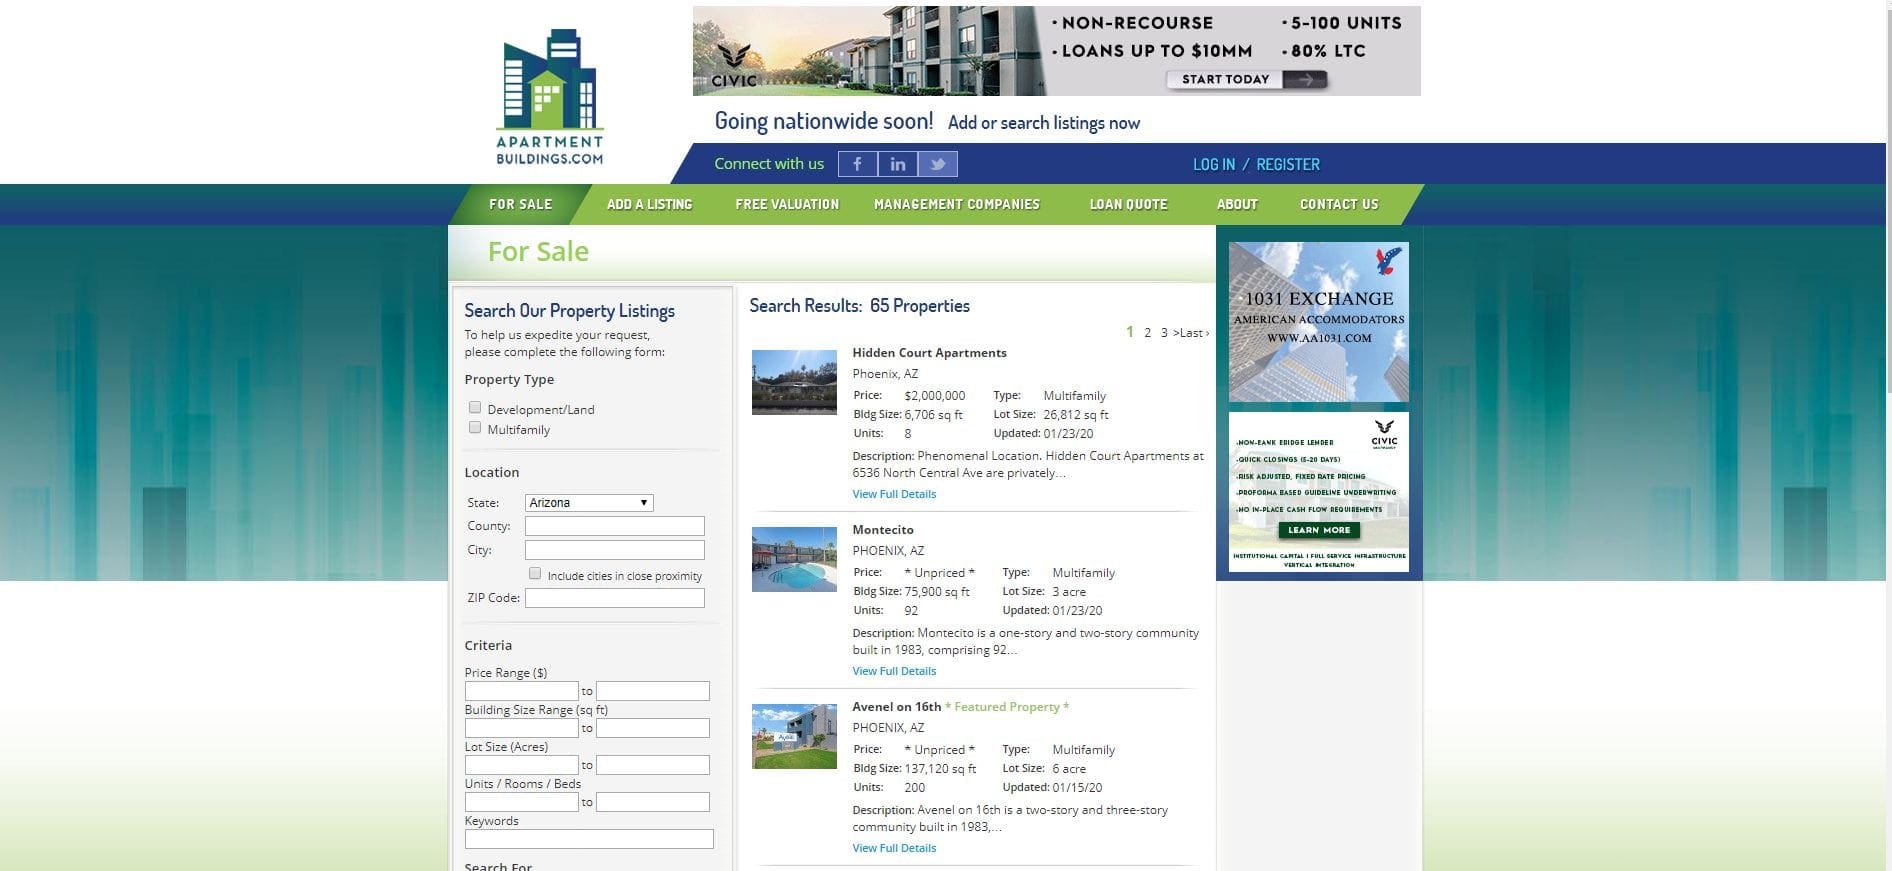 Screenshot of the apartmentbuildings.com search page featuring listings in Arizona